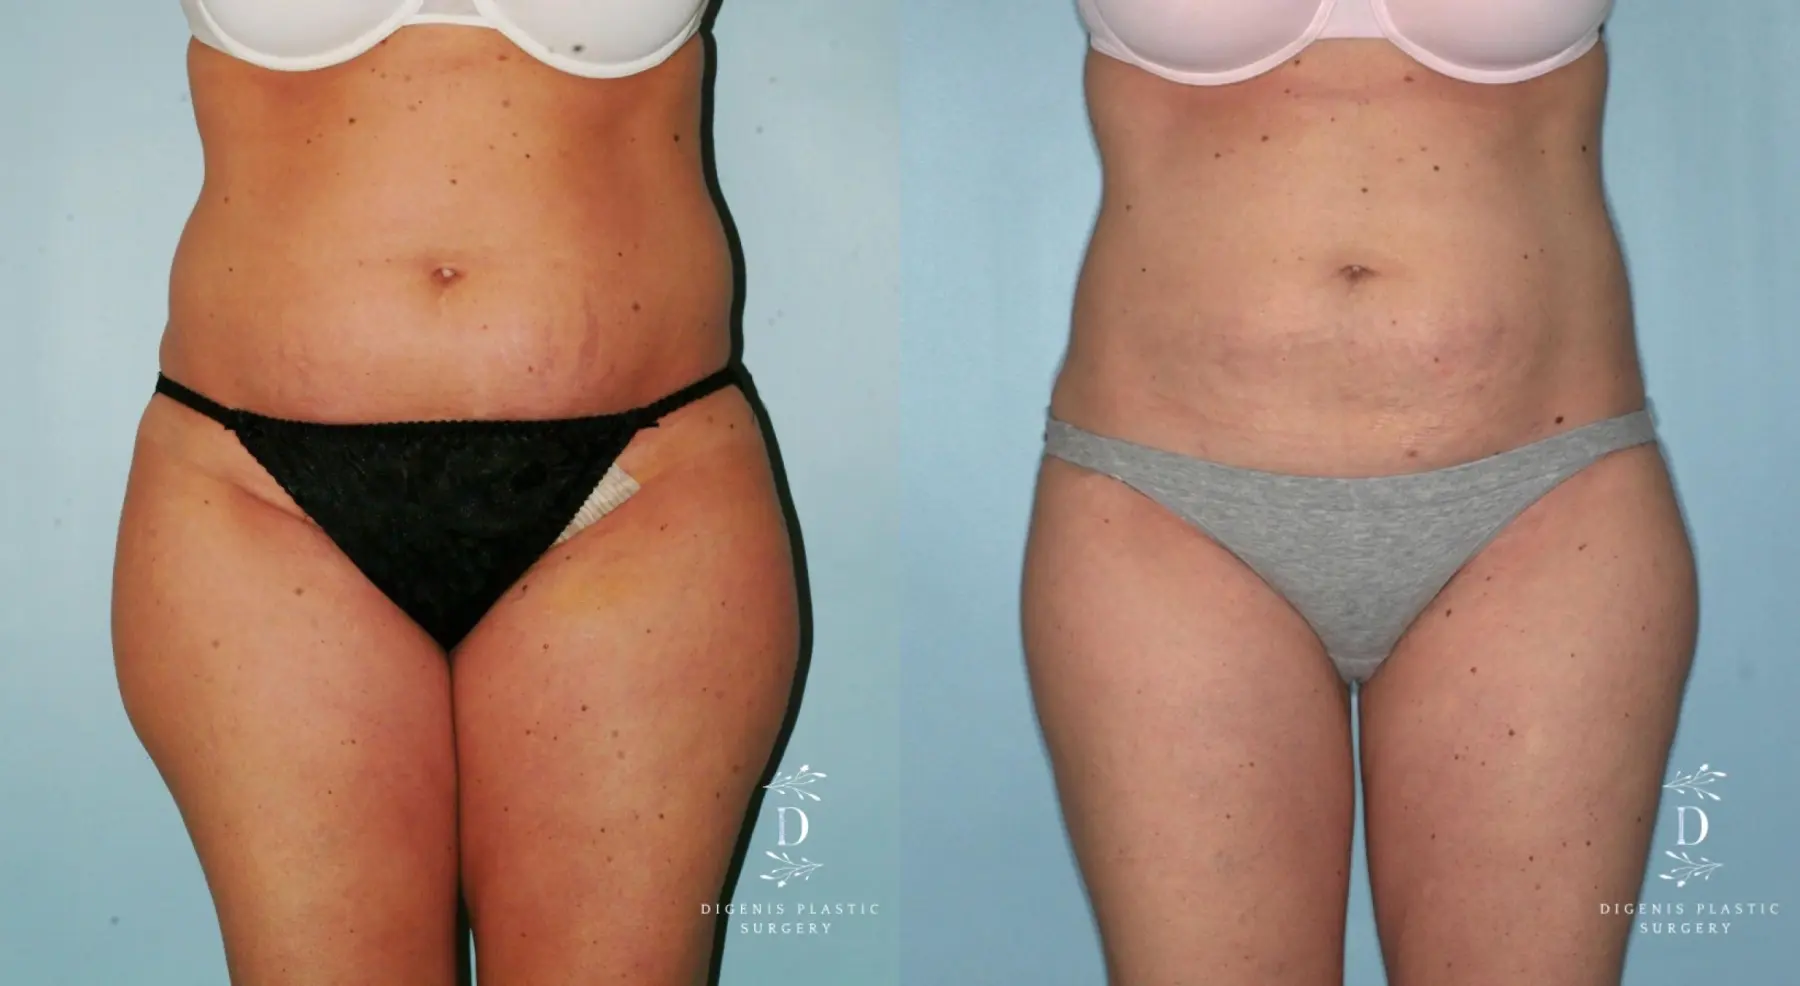 Liposuction: Patient 7 - Before and After 1